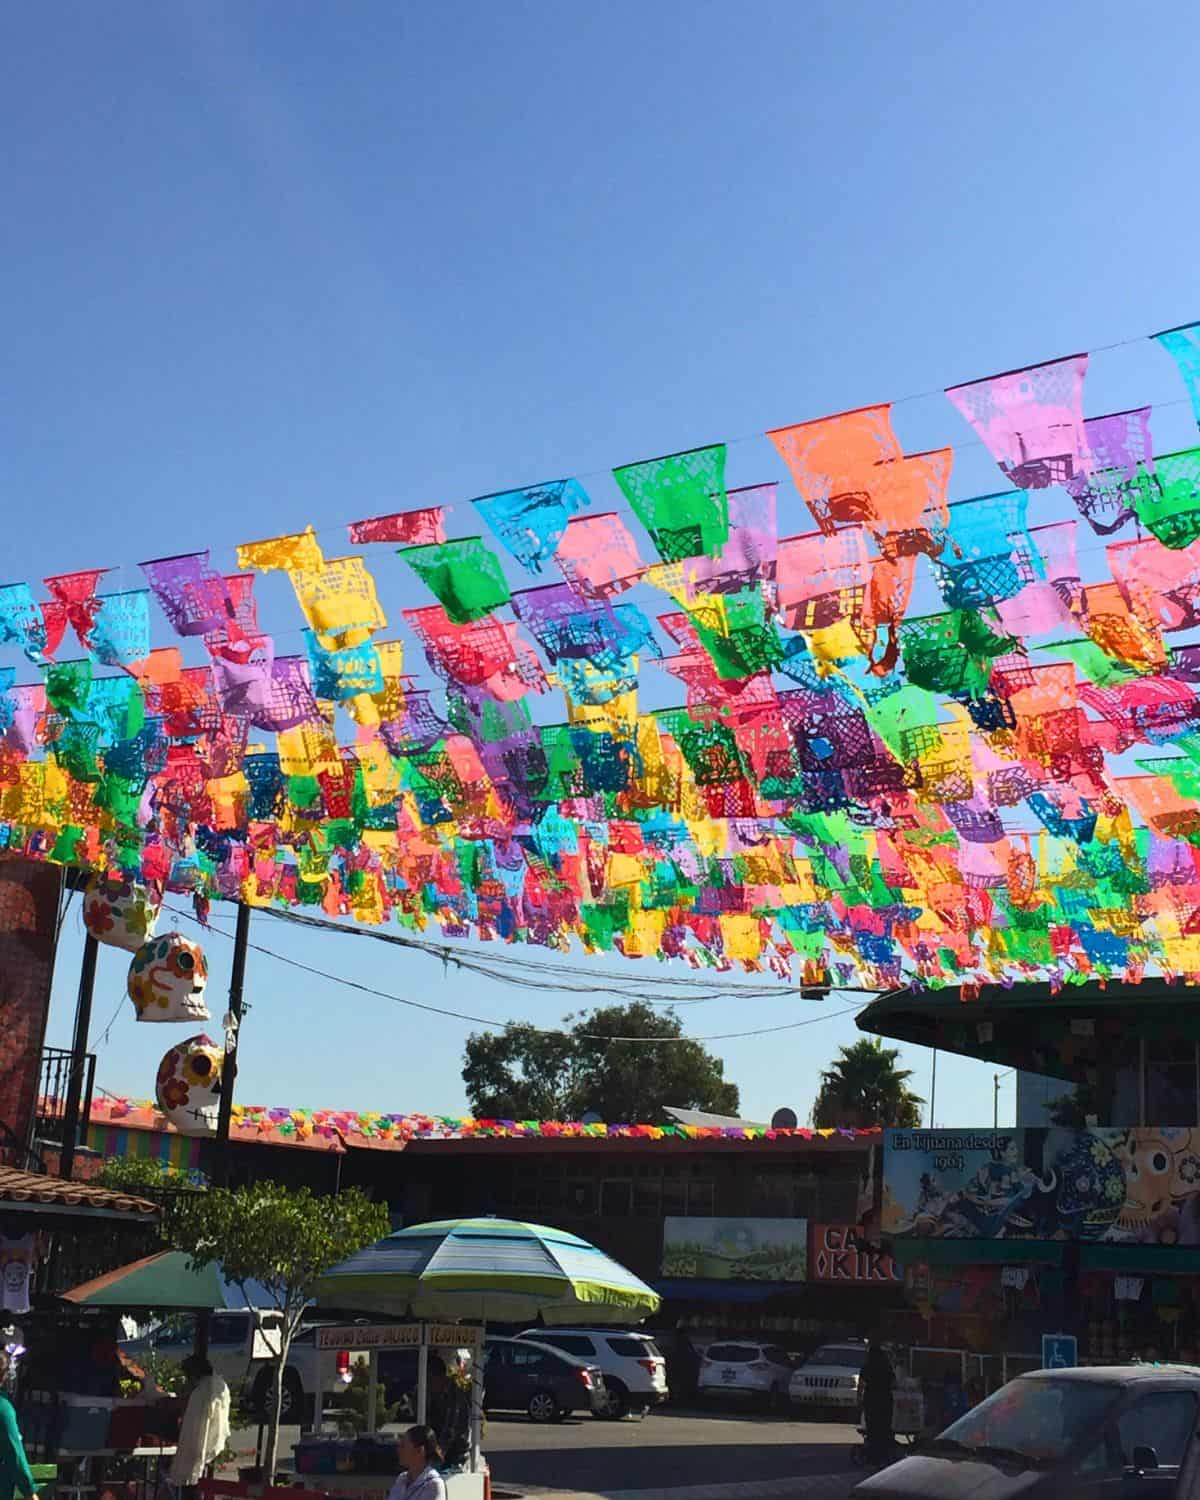 Decorative papel picado flying from the roof at a Mexican market.